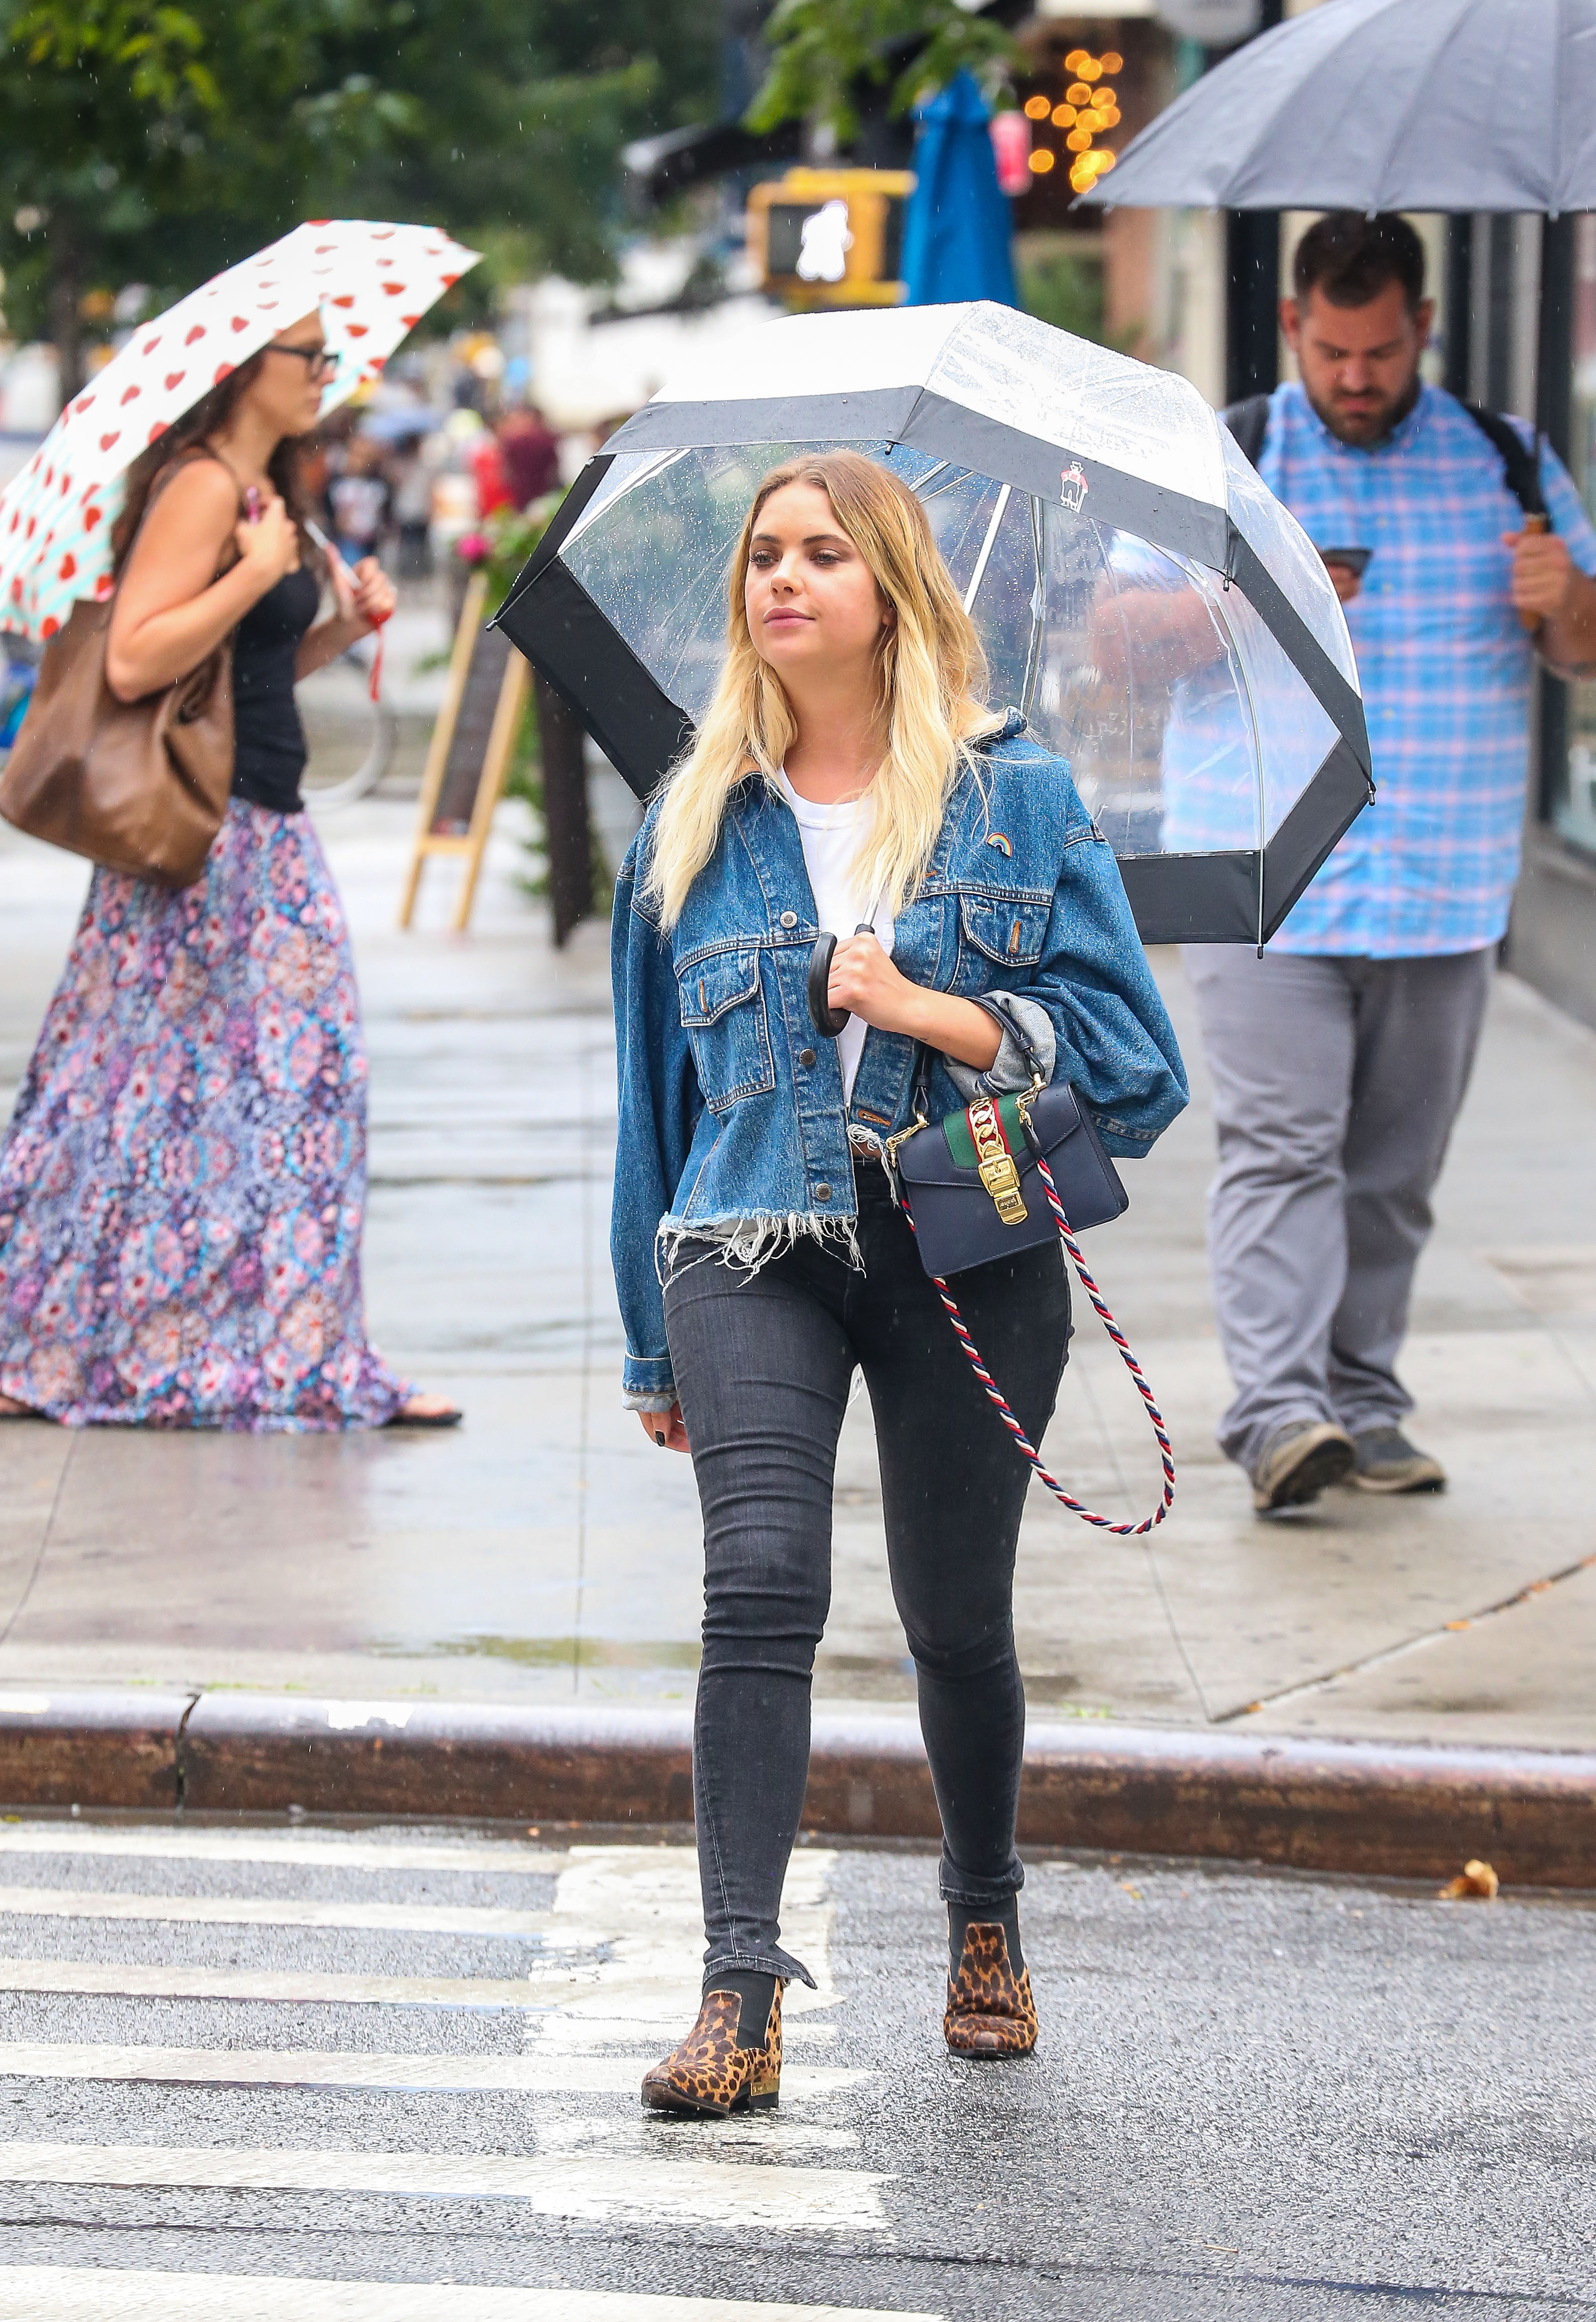 ashley-benson-out-in-nyc-8217-9.jpg